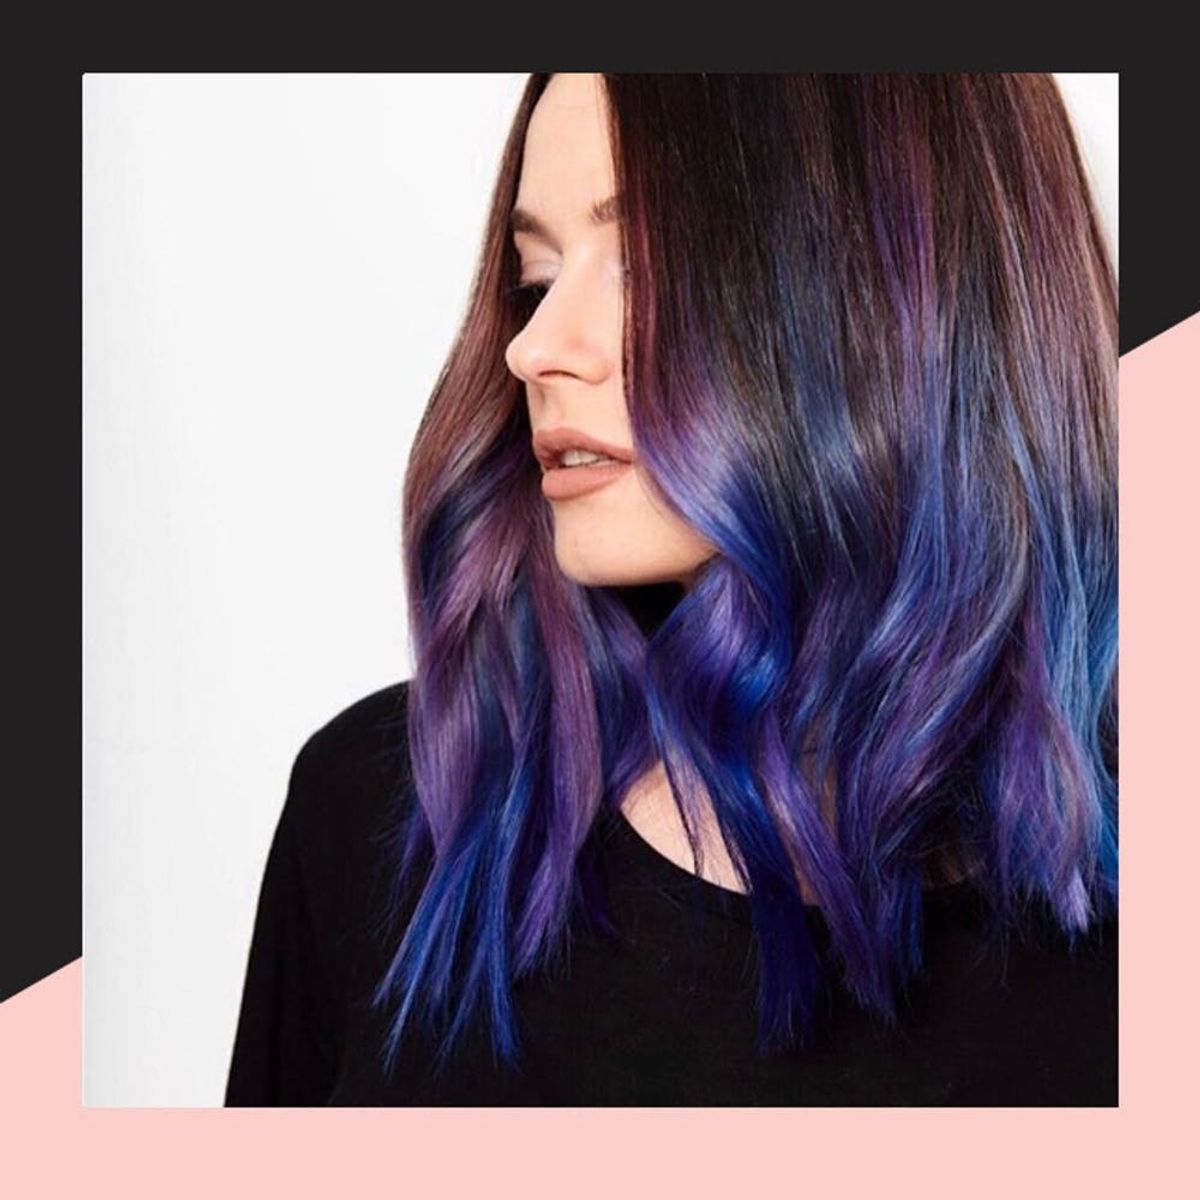 The Geode Hair Trend Is Here Just in Time for Summer